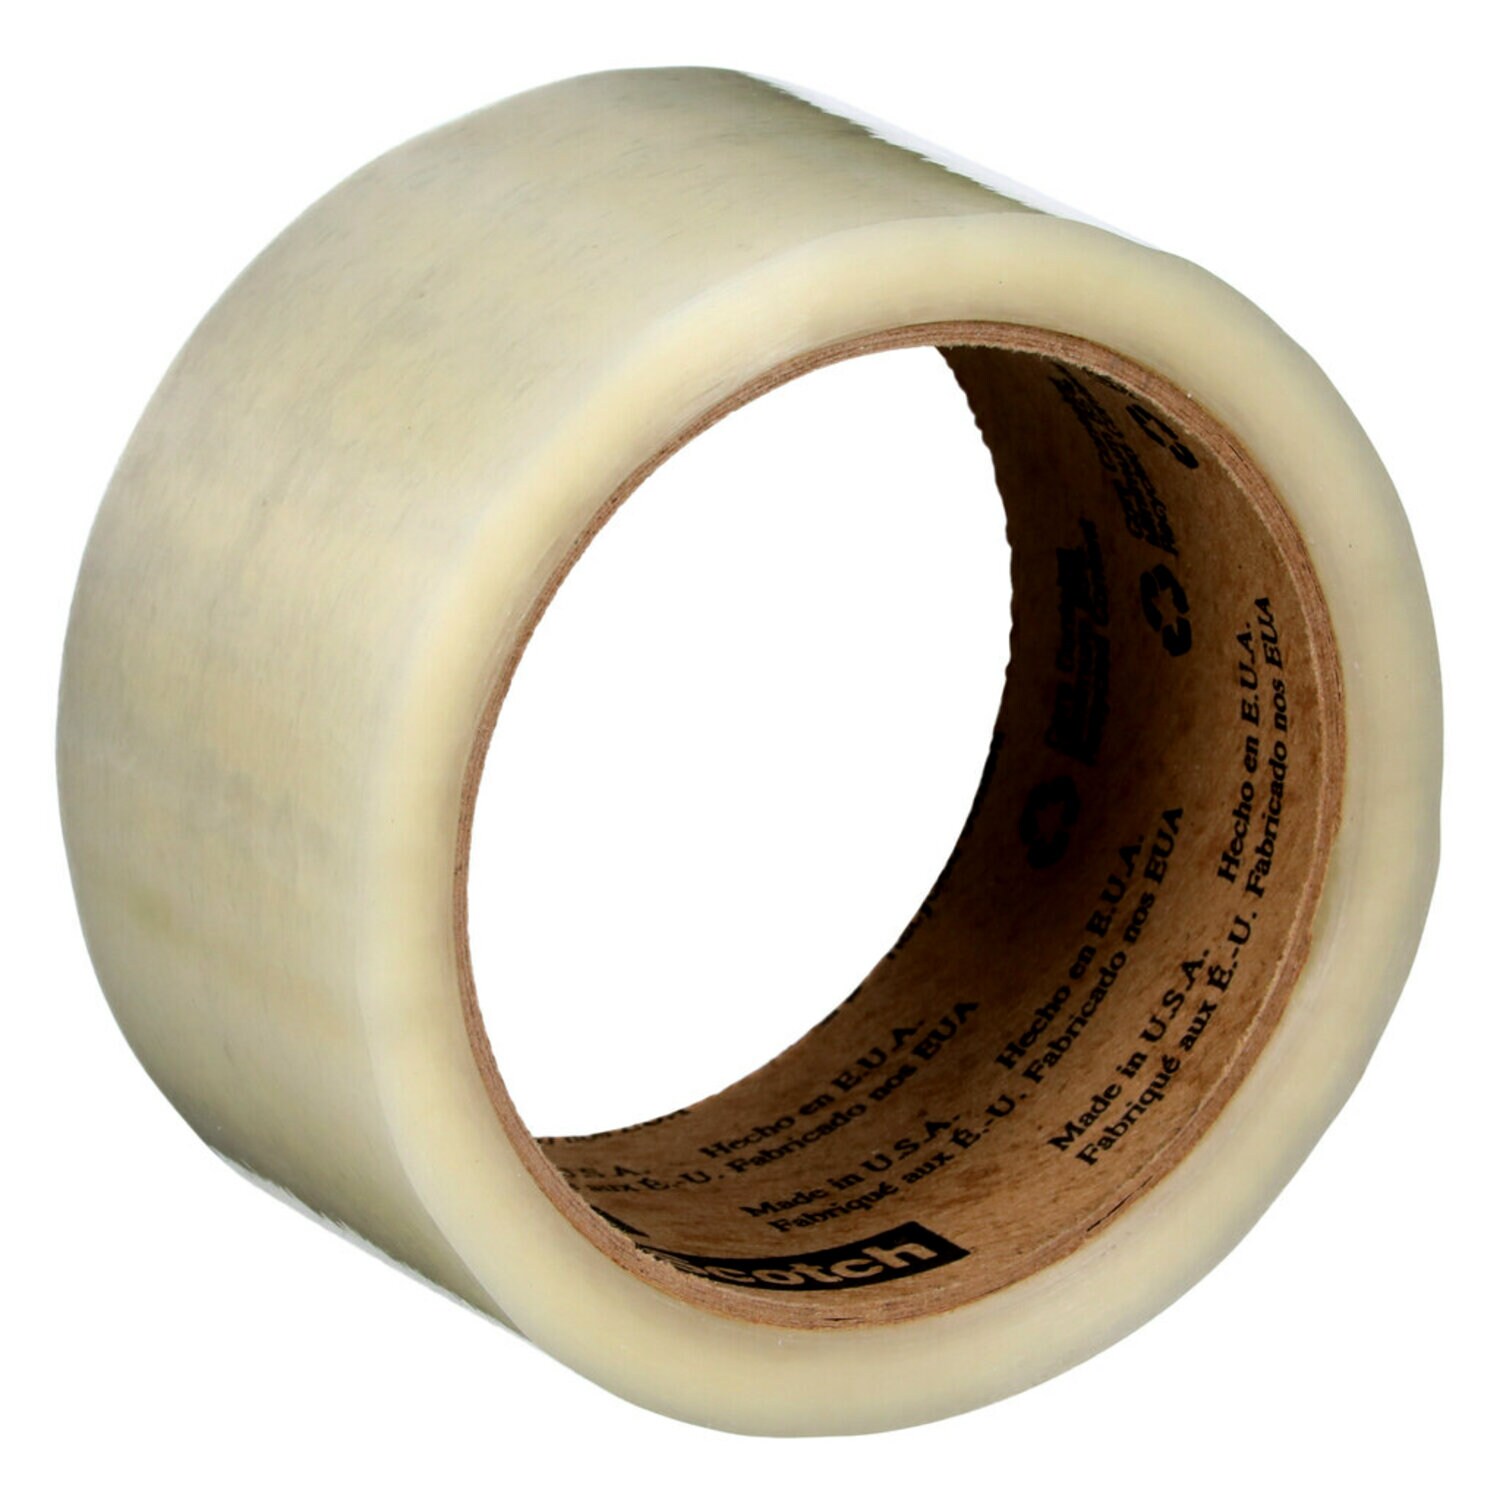 7010335128 - Scotch Box Sealing Tape 371, Clear, 48 mm x 50 m, 36/Case (6 rolls/pack
6 packs/case), Conveniently Packaged